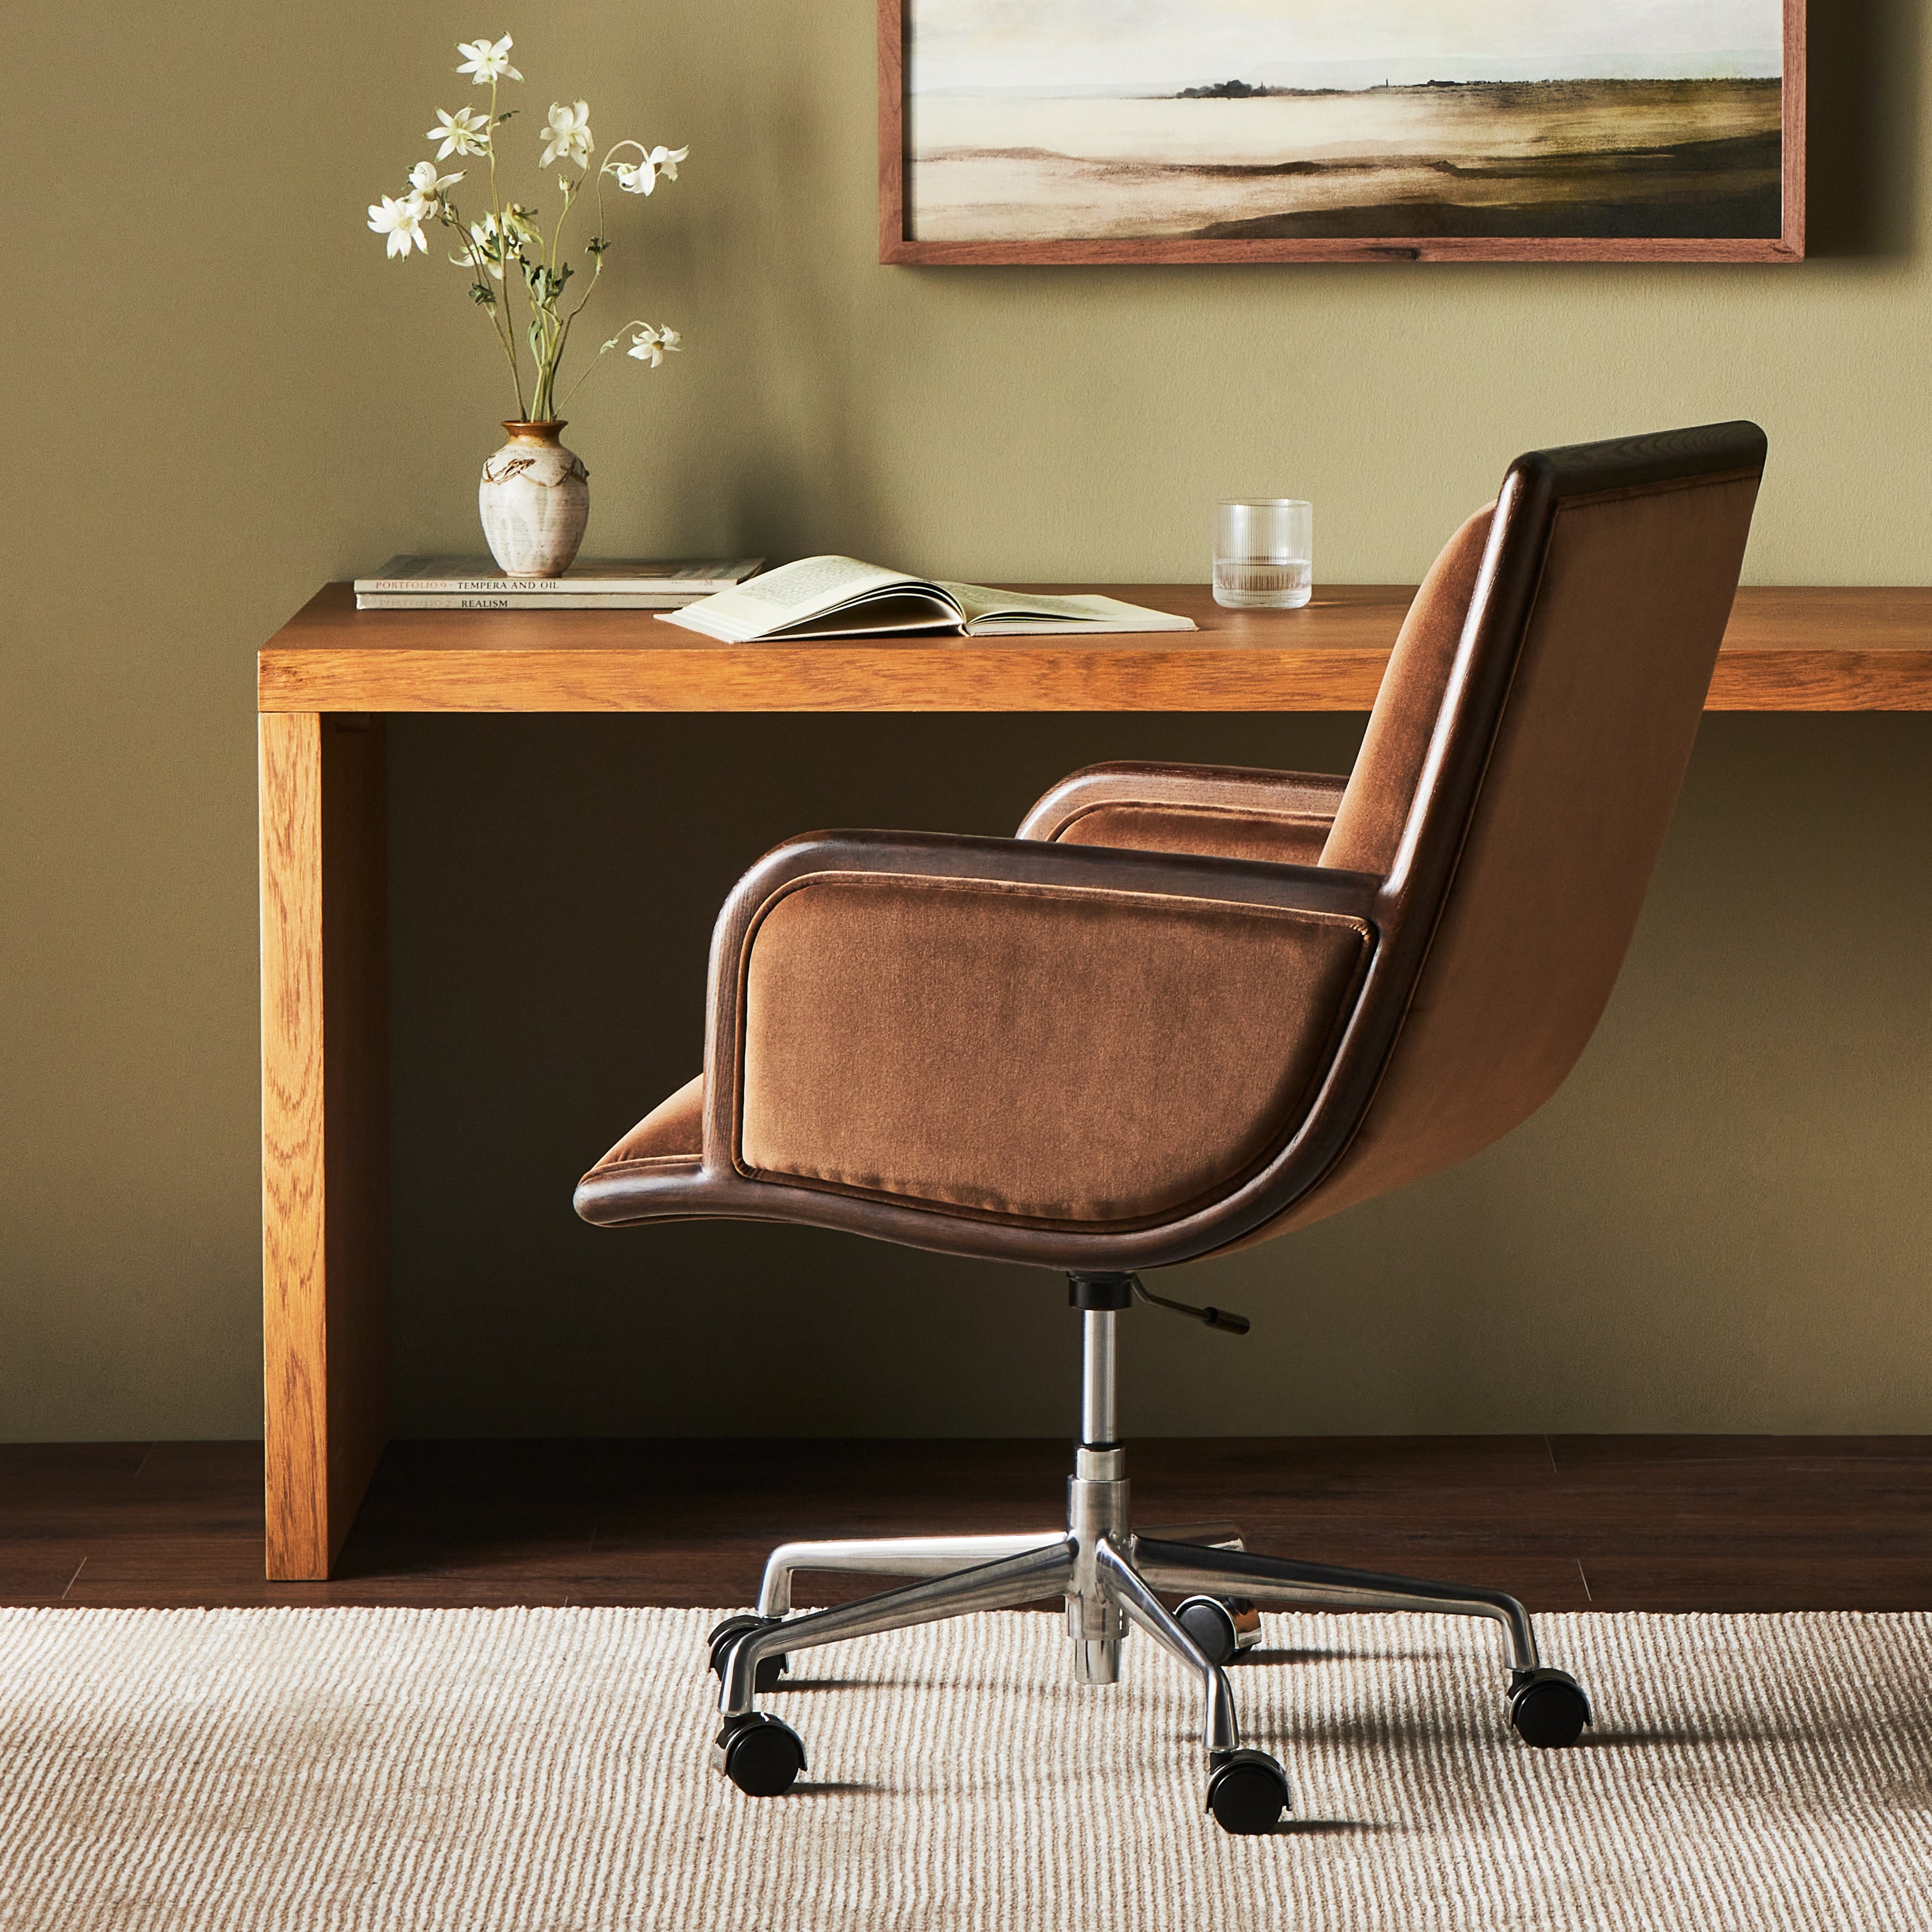 This comfort-driven take on the modern desk chair features velvety cocoa-colored upholstery, pared with a wooden frame. Casters and seat height adjustability for ease as you work. Amethyst Home provides interior design, new construction, custom furniture, and area rugs in the Portland metro area.